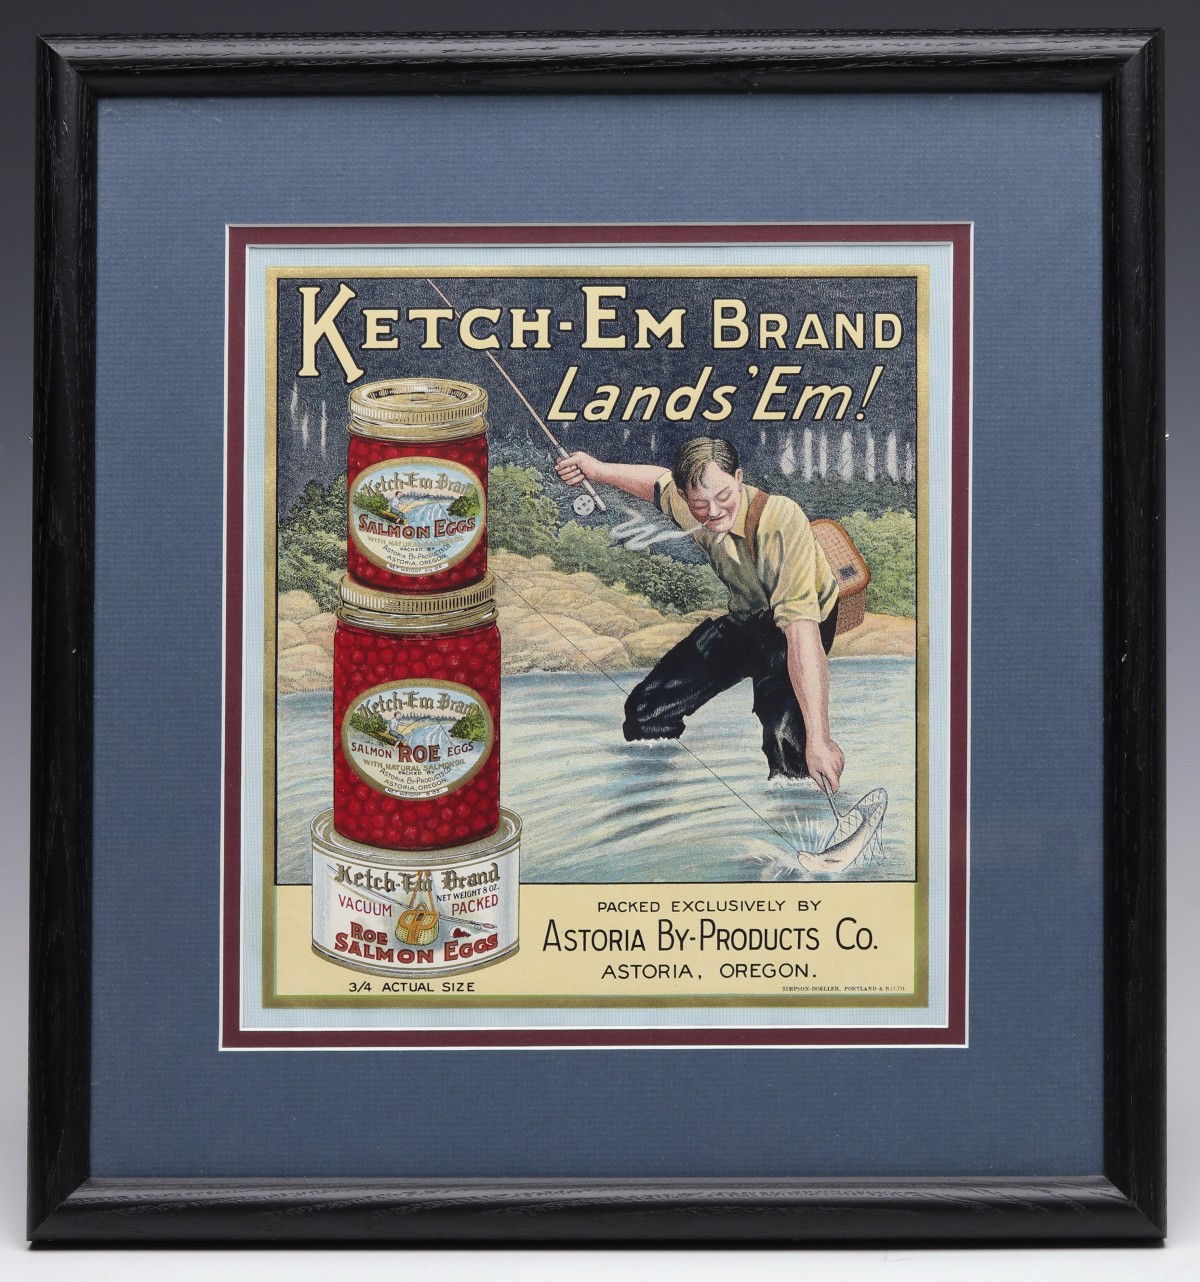 A NEW OLD STOCK LABEL FOR KETCH-EM BRAND SALMON ROE